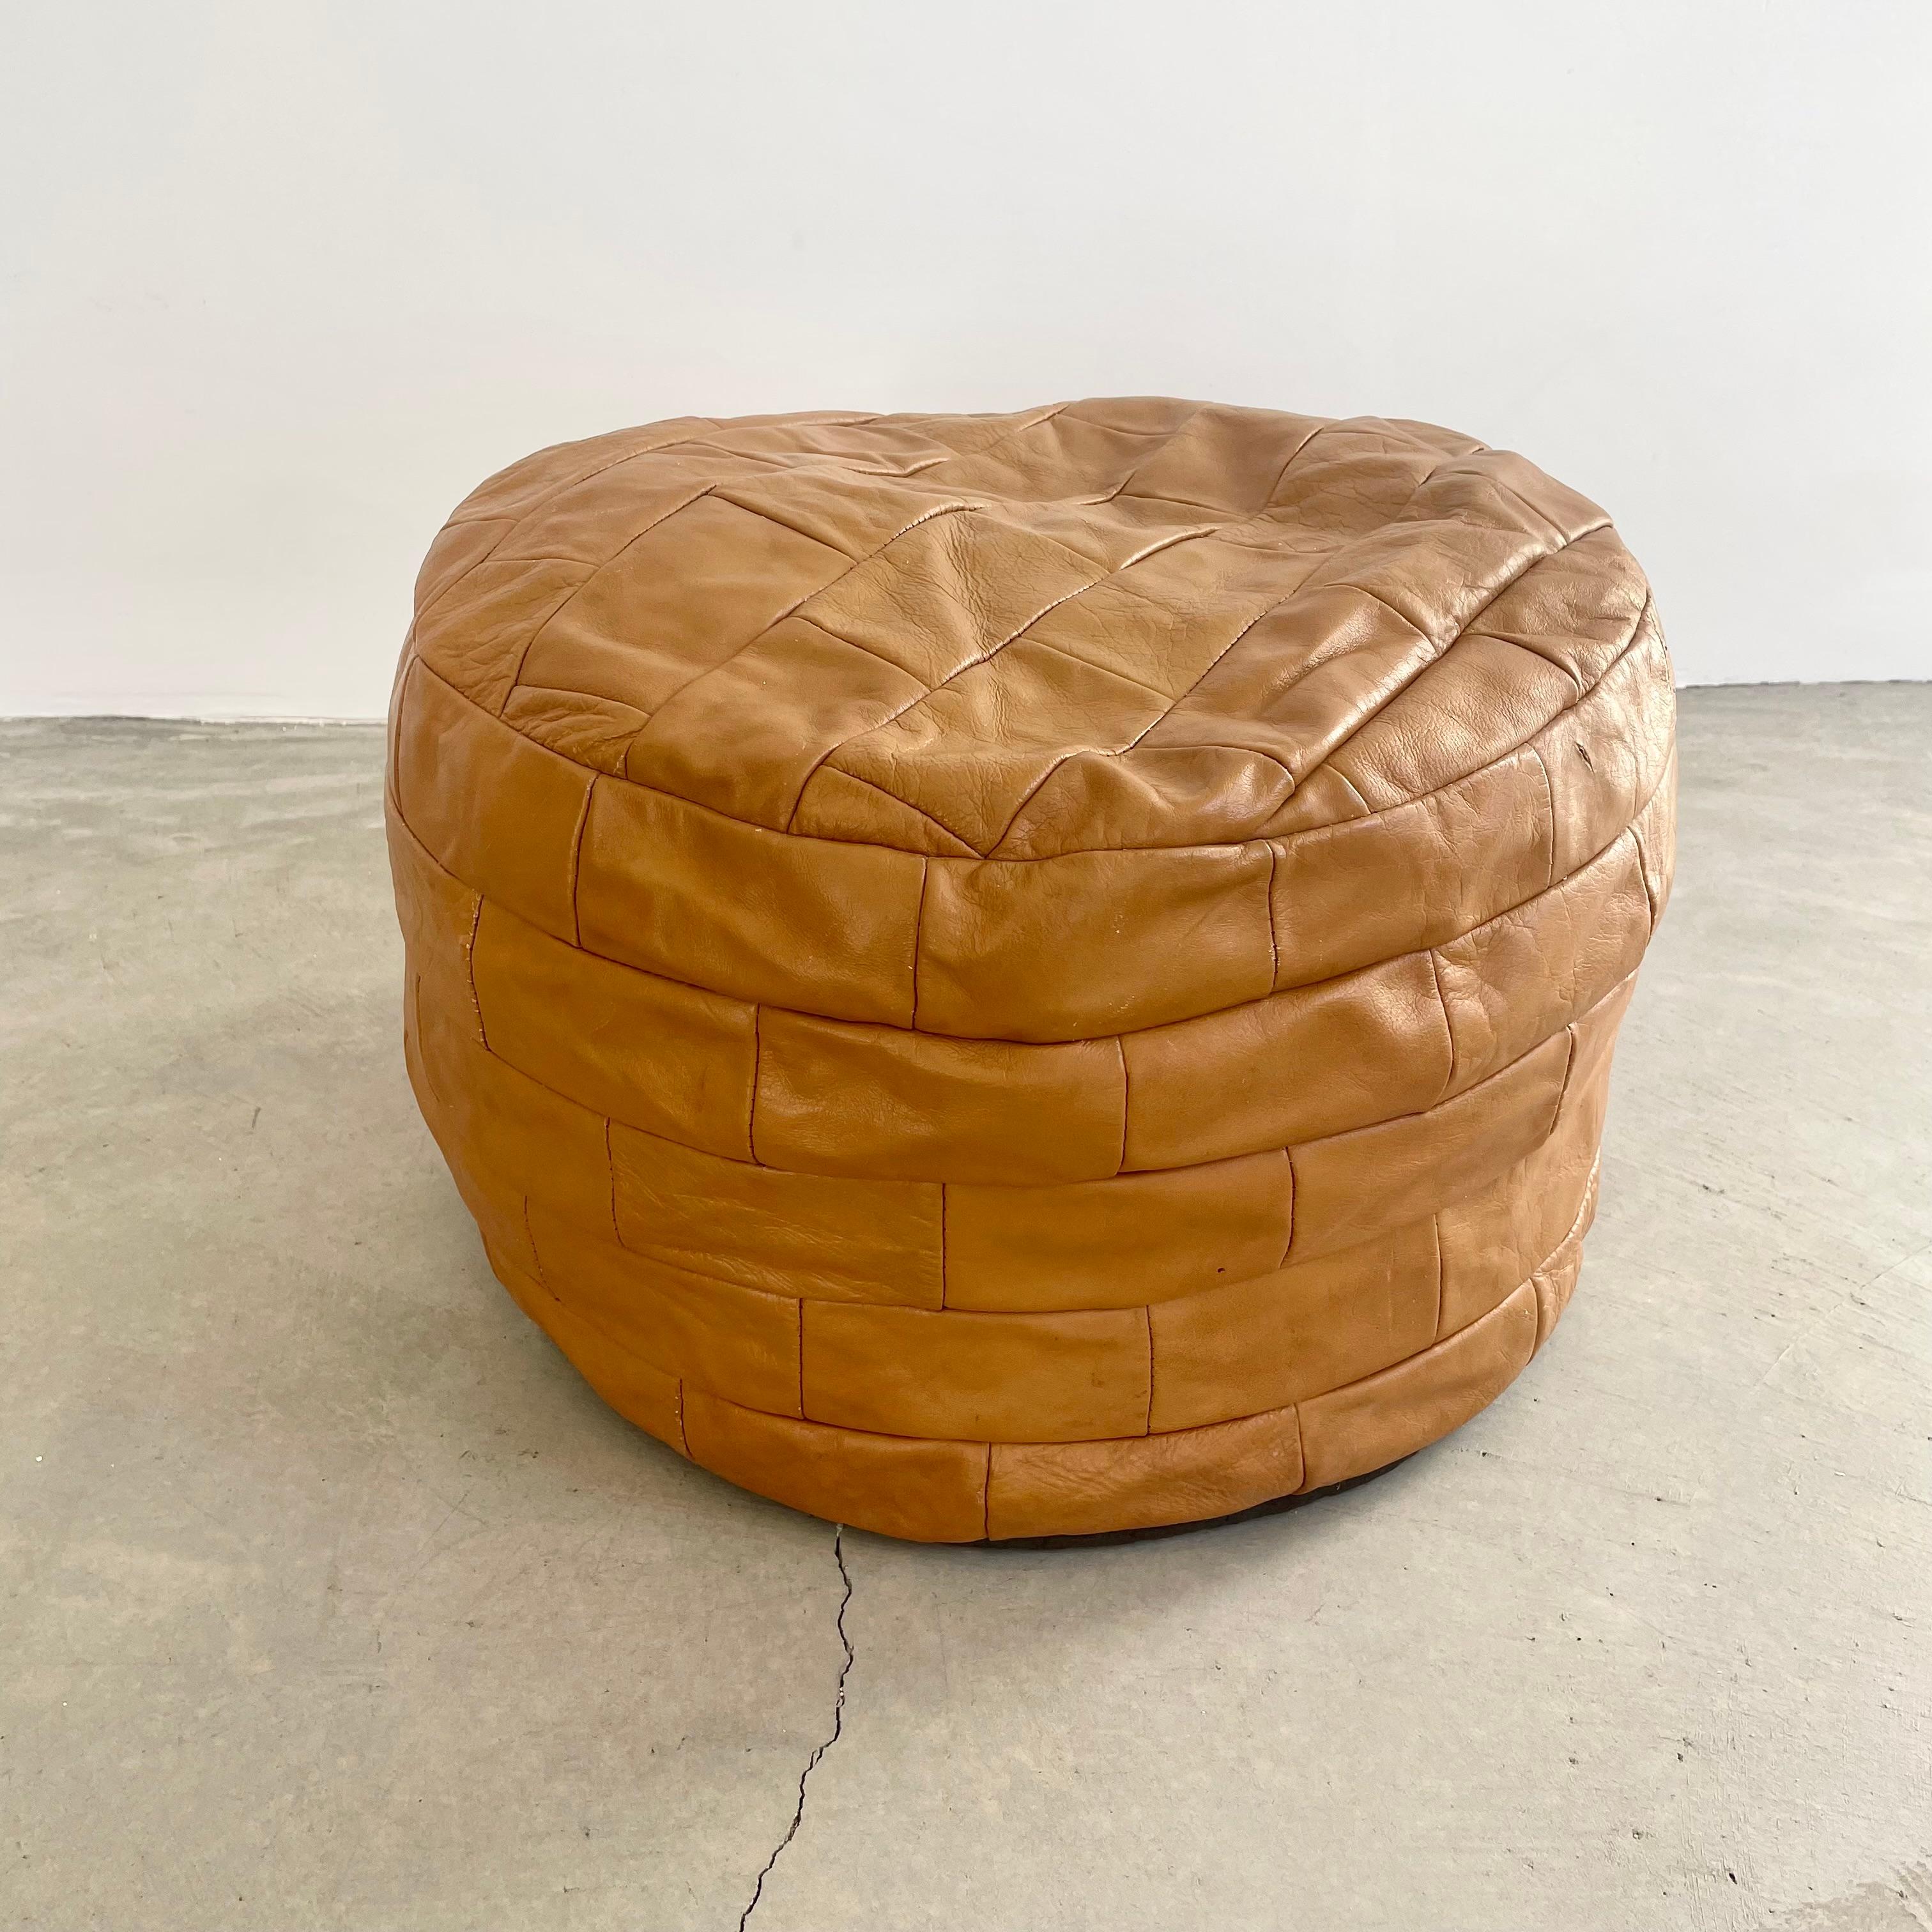 Elegant light-coloured tan leather pouf/ottoman by Swiss designer De Sede with square patchwork. Handmade with wonderful faded patina or varying hues of tan. Gorgeous accent piece. Good vintage condition. Wear appropriate with age. Brand new filler.